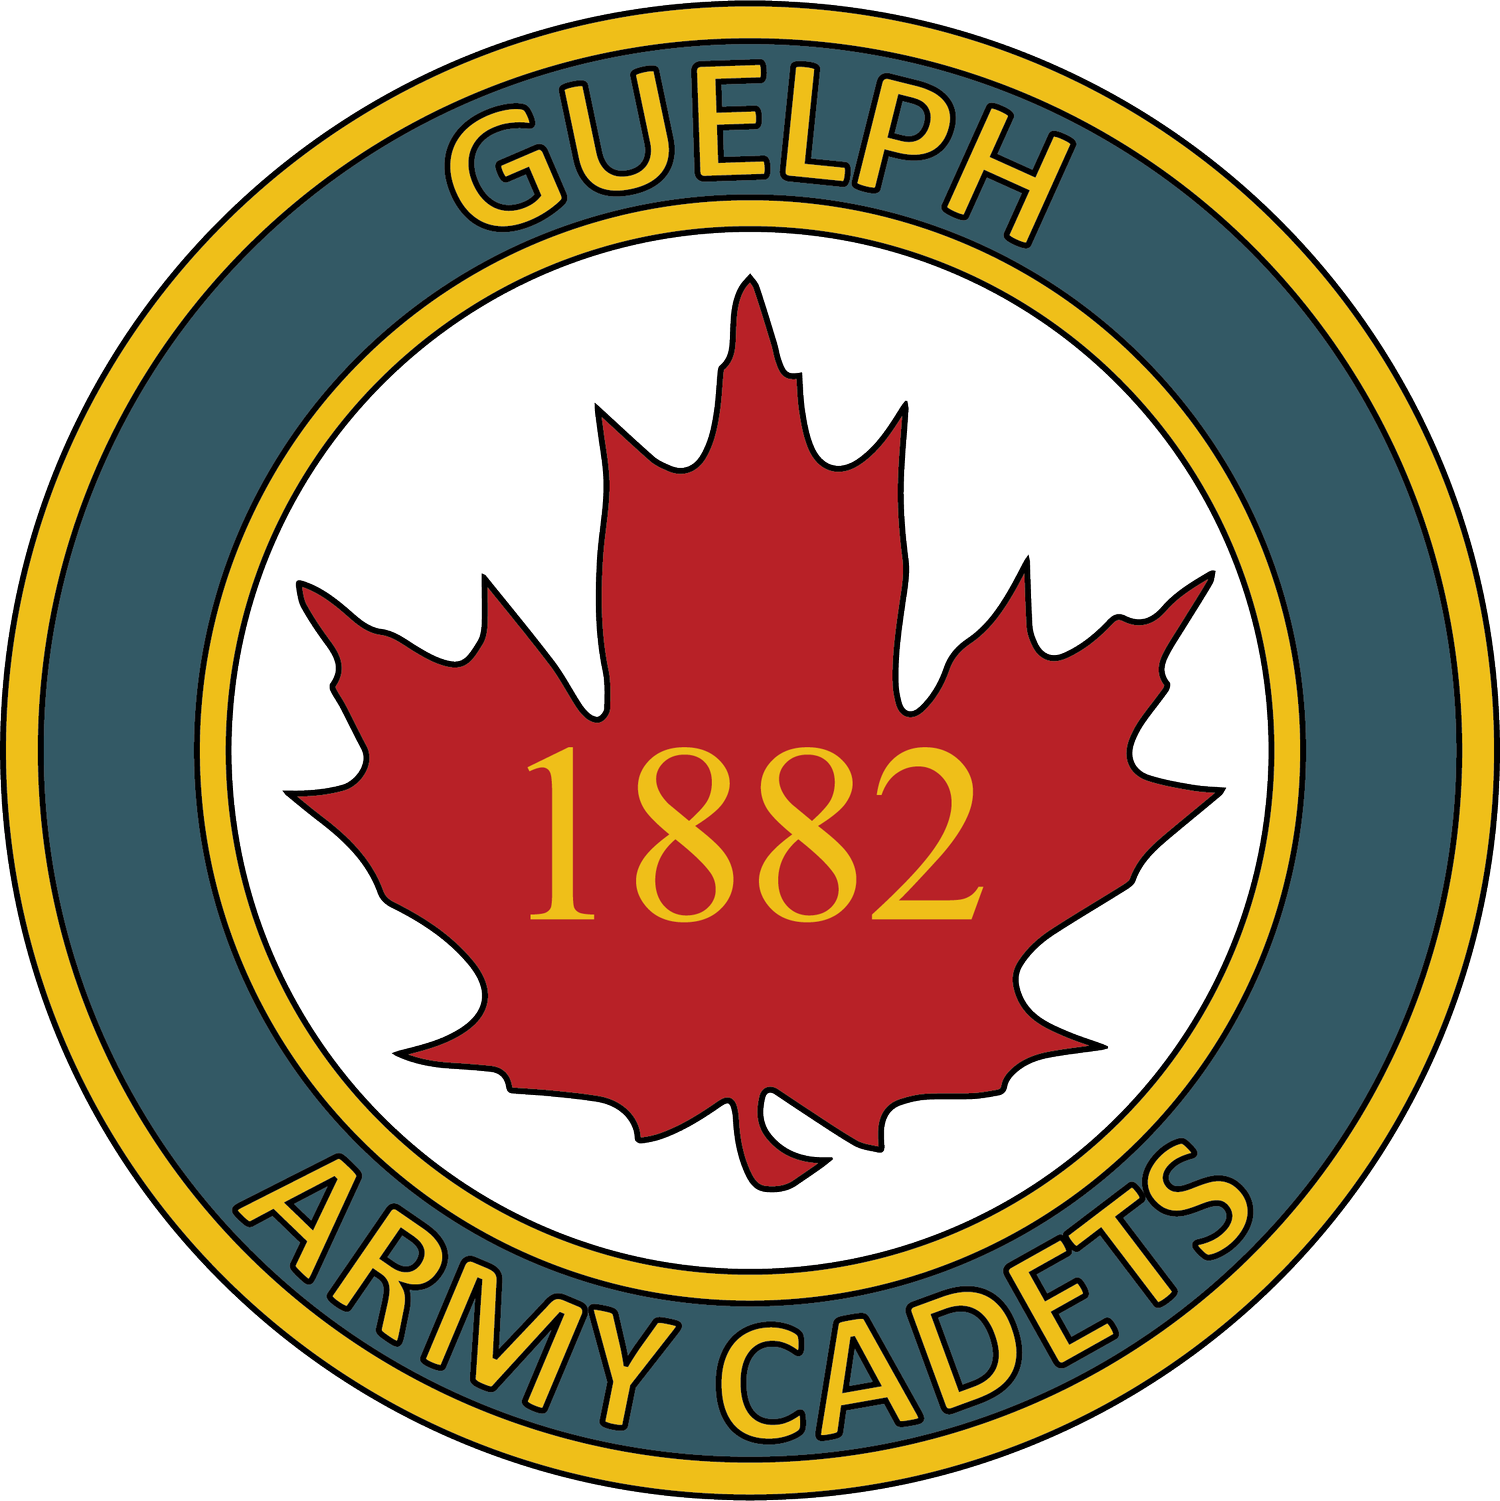 The Guelph &quot;1882 Wellington Rifles&quot; Army Cadets